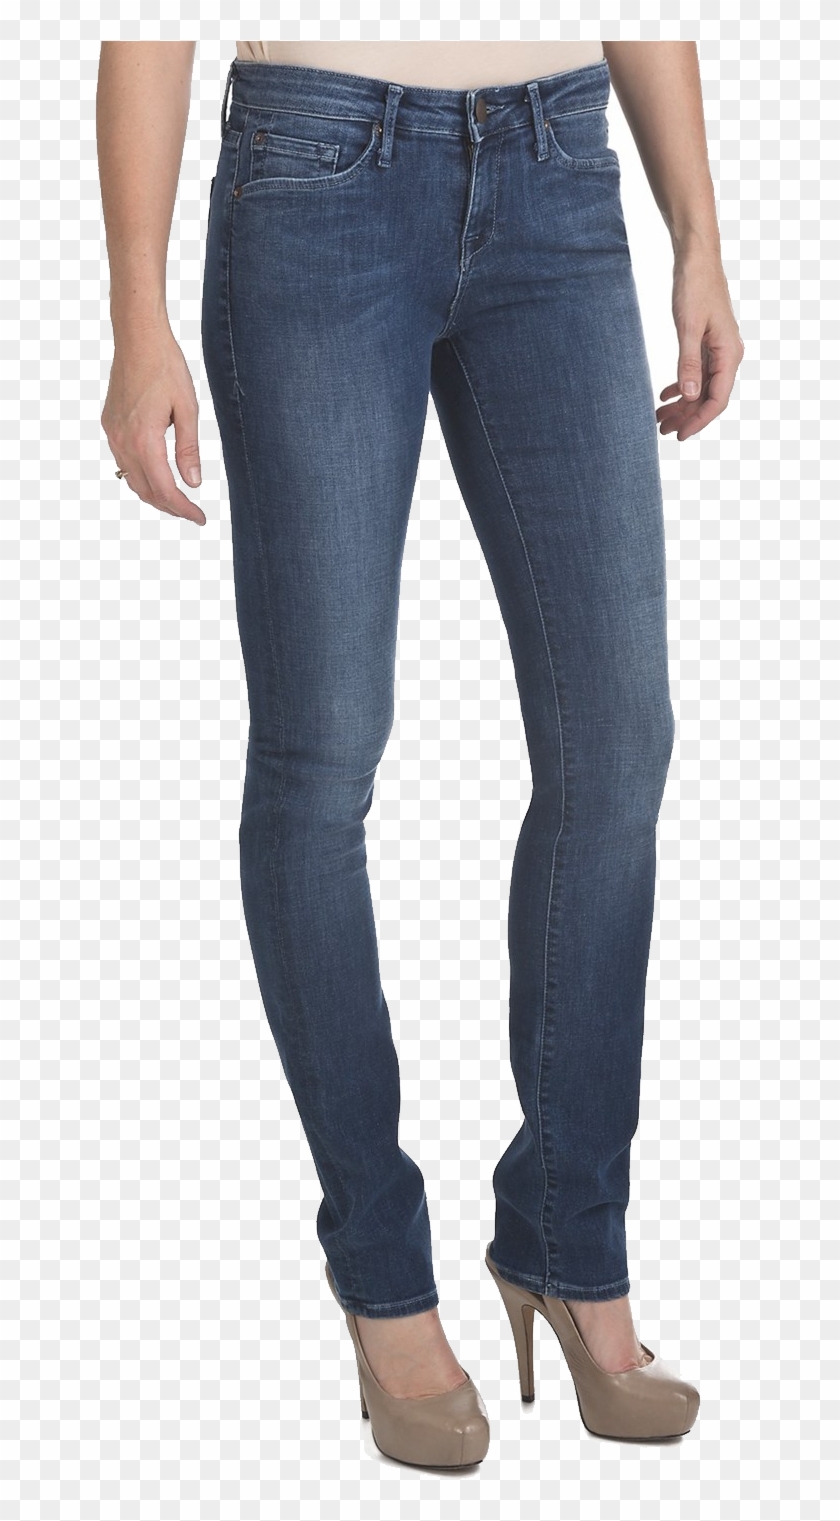 Girls Jeans Png #873798